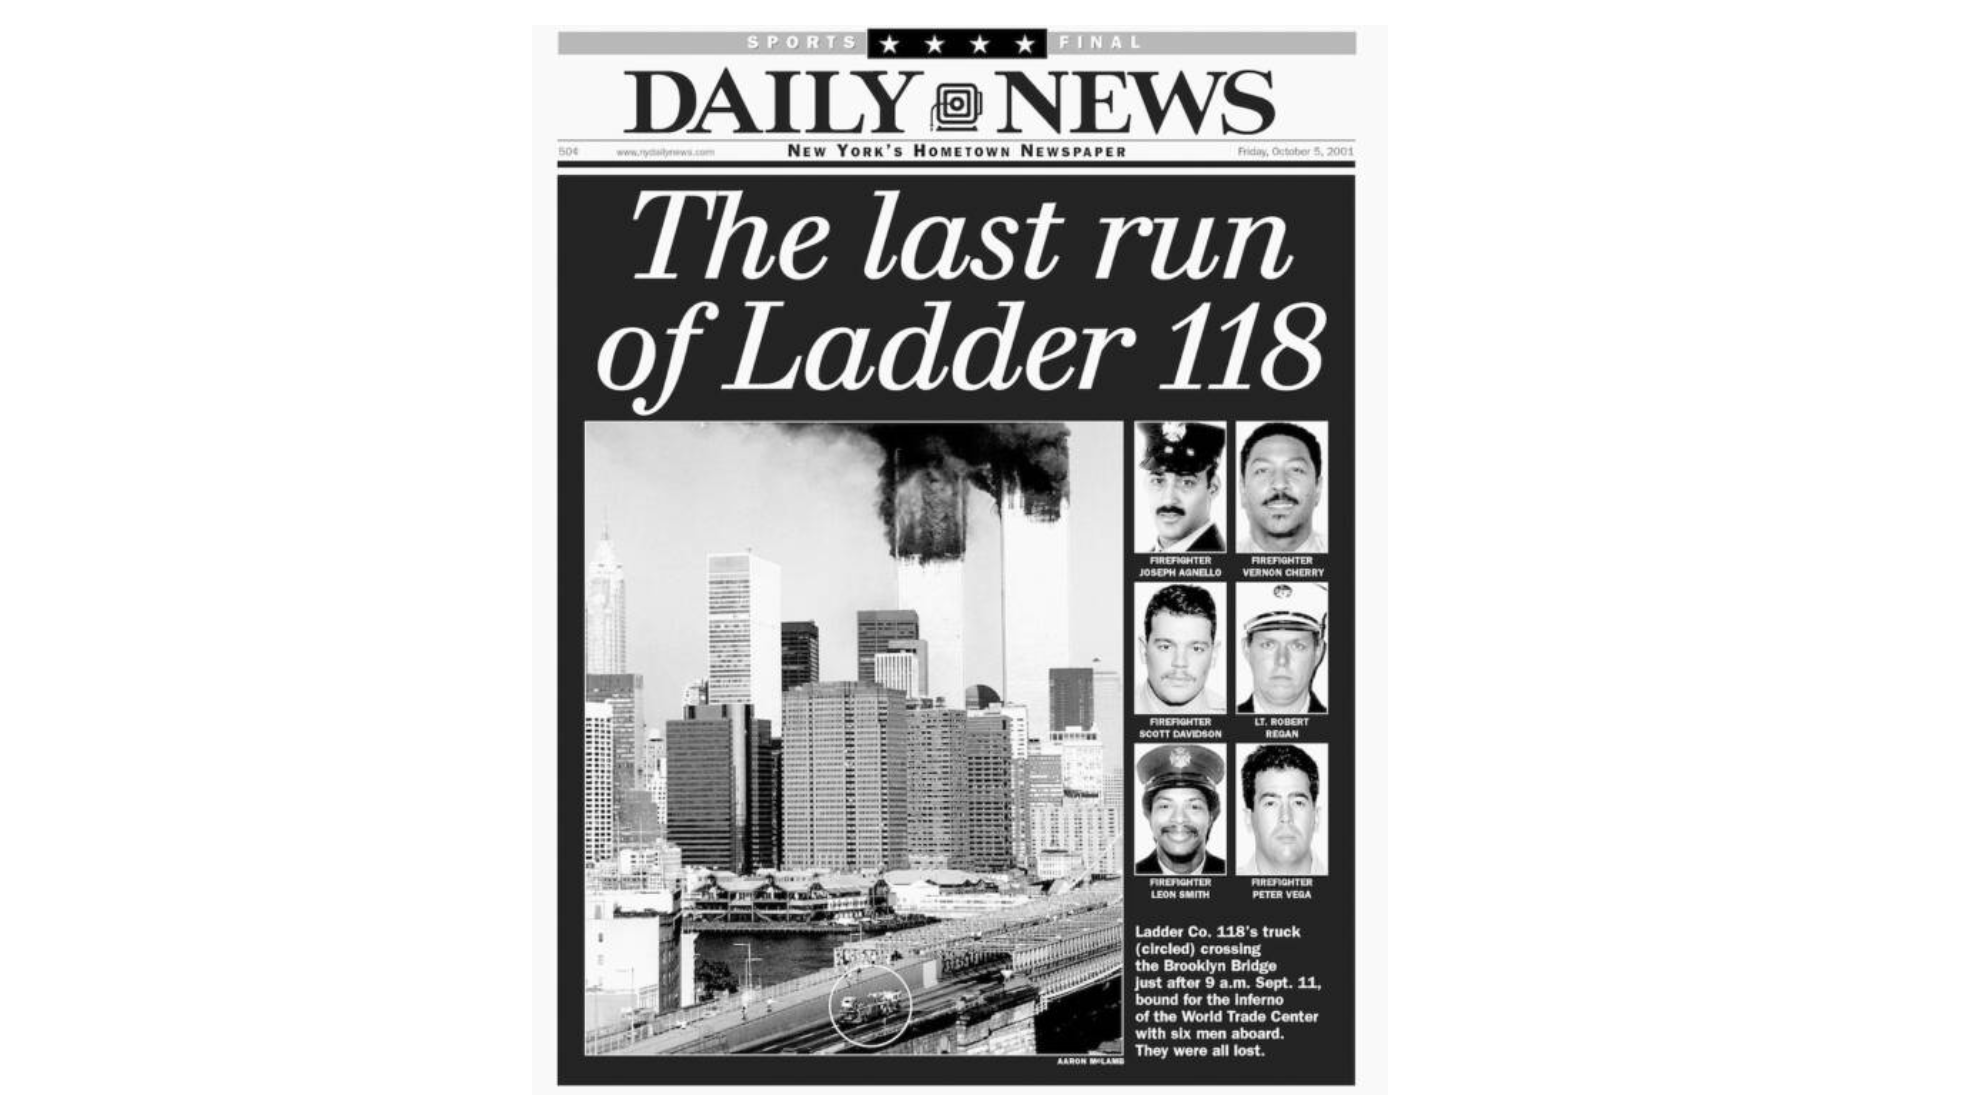 Tra i caduti del Ladder 118 anche Scott Davidson. Photo by NY Daily News Archive via Getty Images